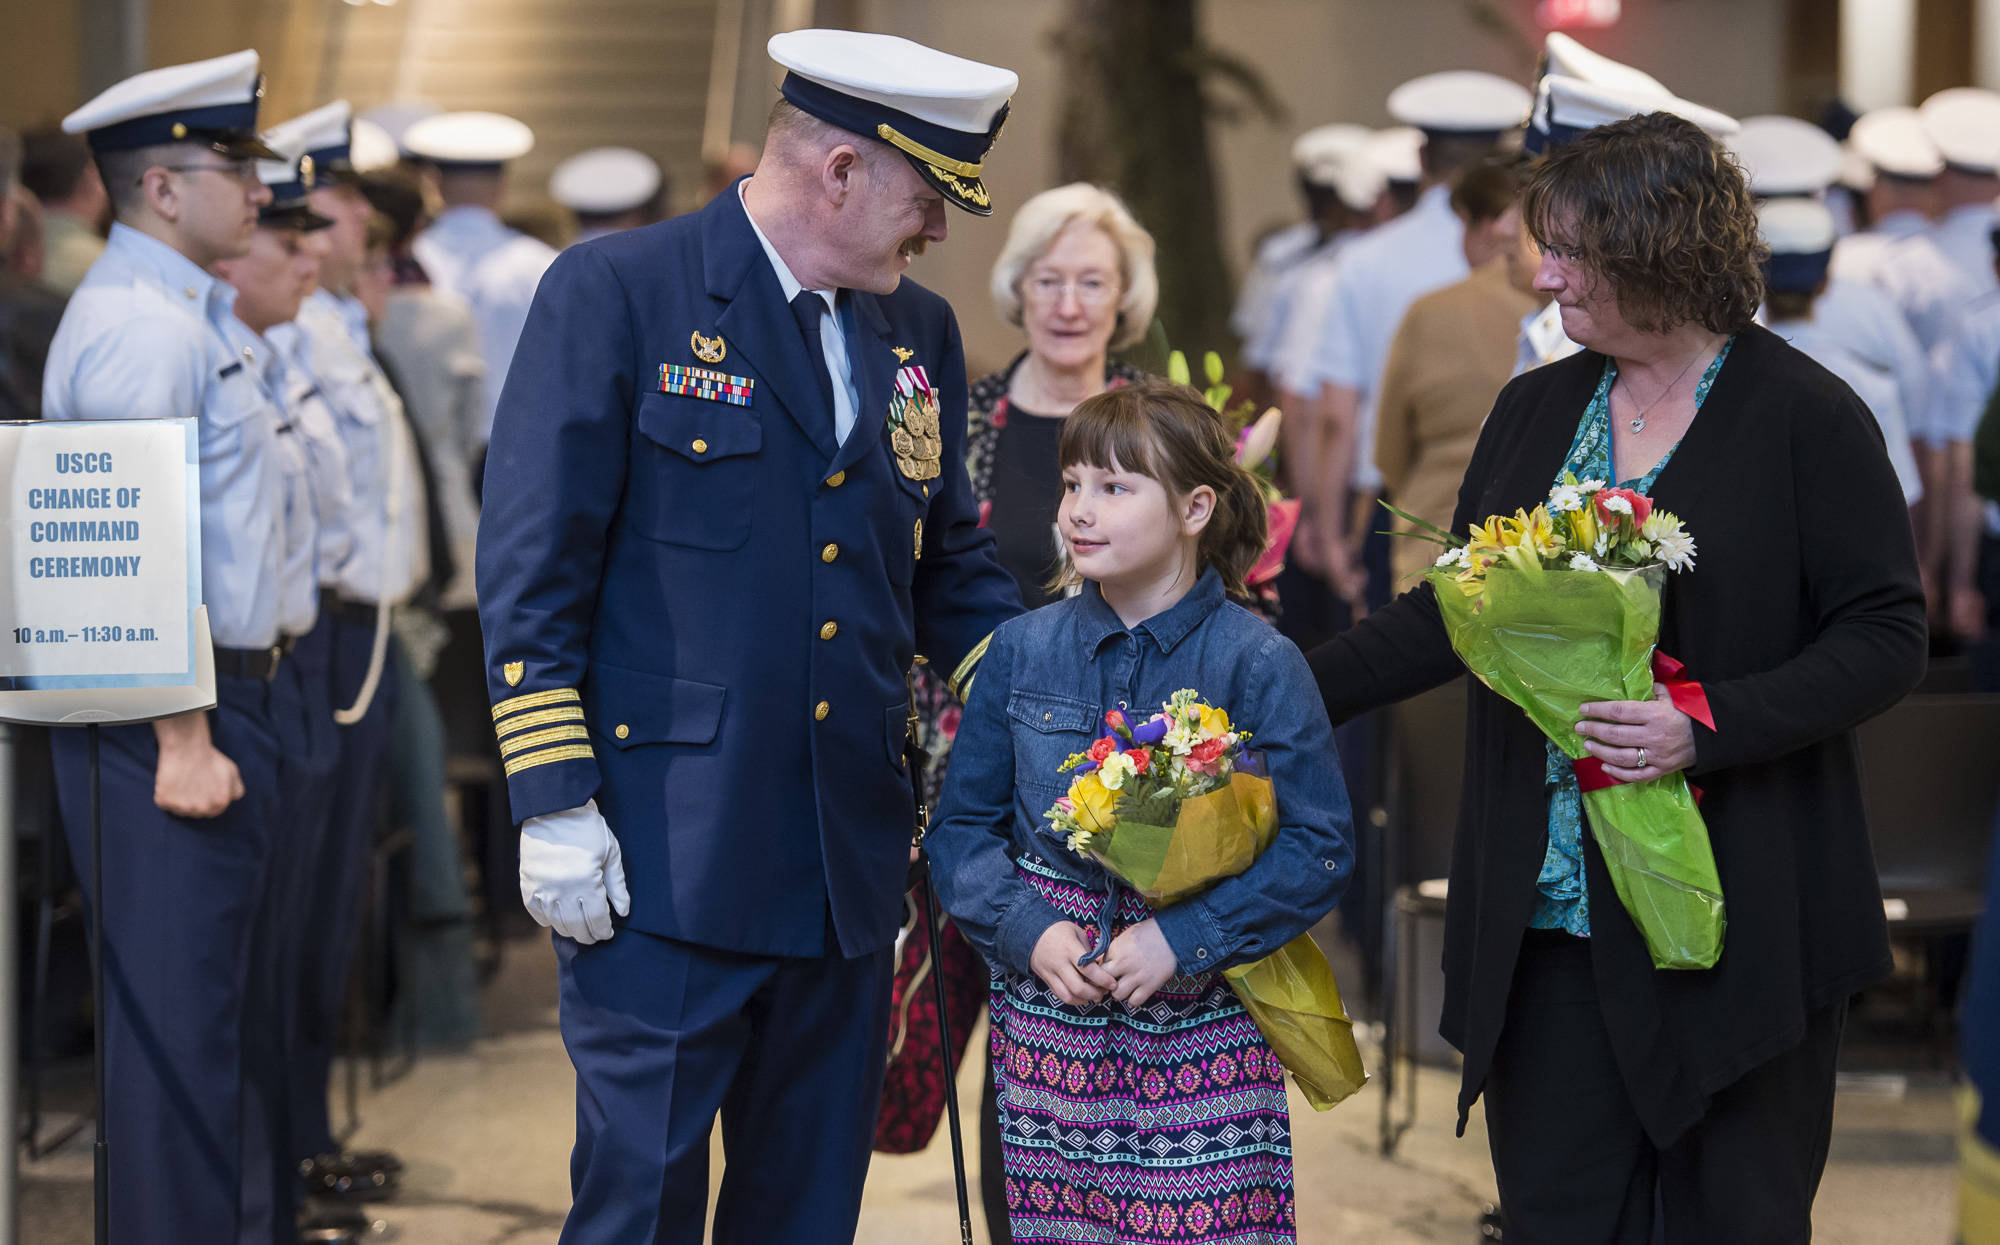 Capt. Phillip Thorne, outgoing Commander of Coast Guard Sector Juneau, walks with his wife, Jennifer, daughter, Madeline, 8, and mother, Gloria Thorne, at the conclusion of his Change of Command and Retirement Ceremonies at the Alaska State Museum on Friday, May 4, 2018. (Michael Penn | Juneau Empire)